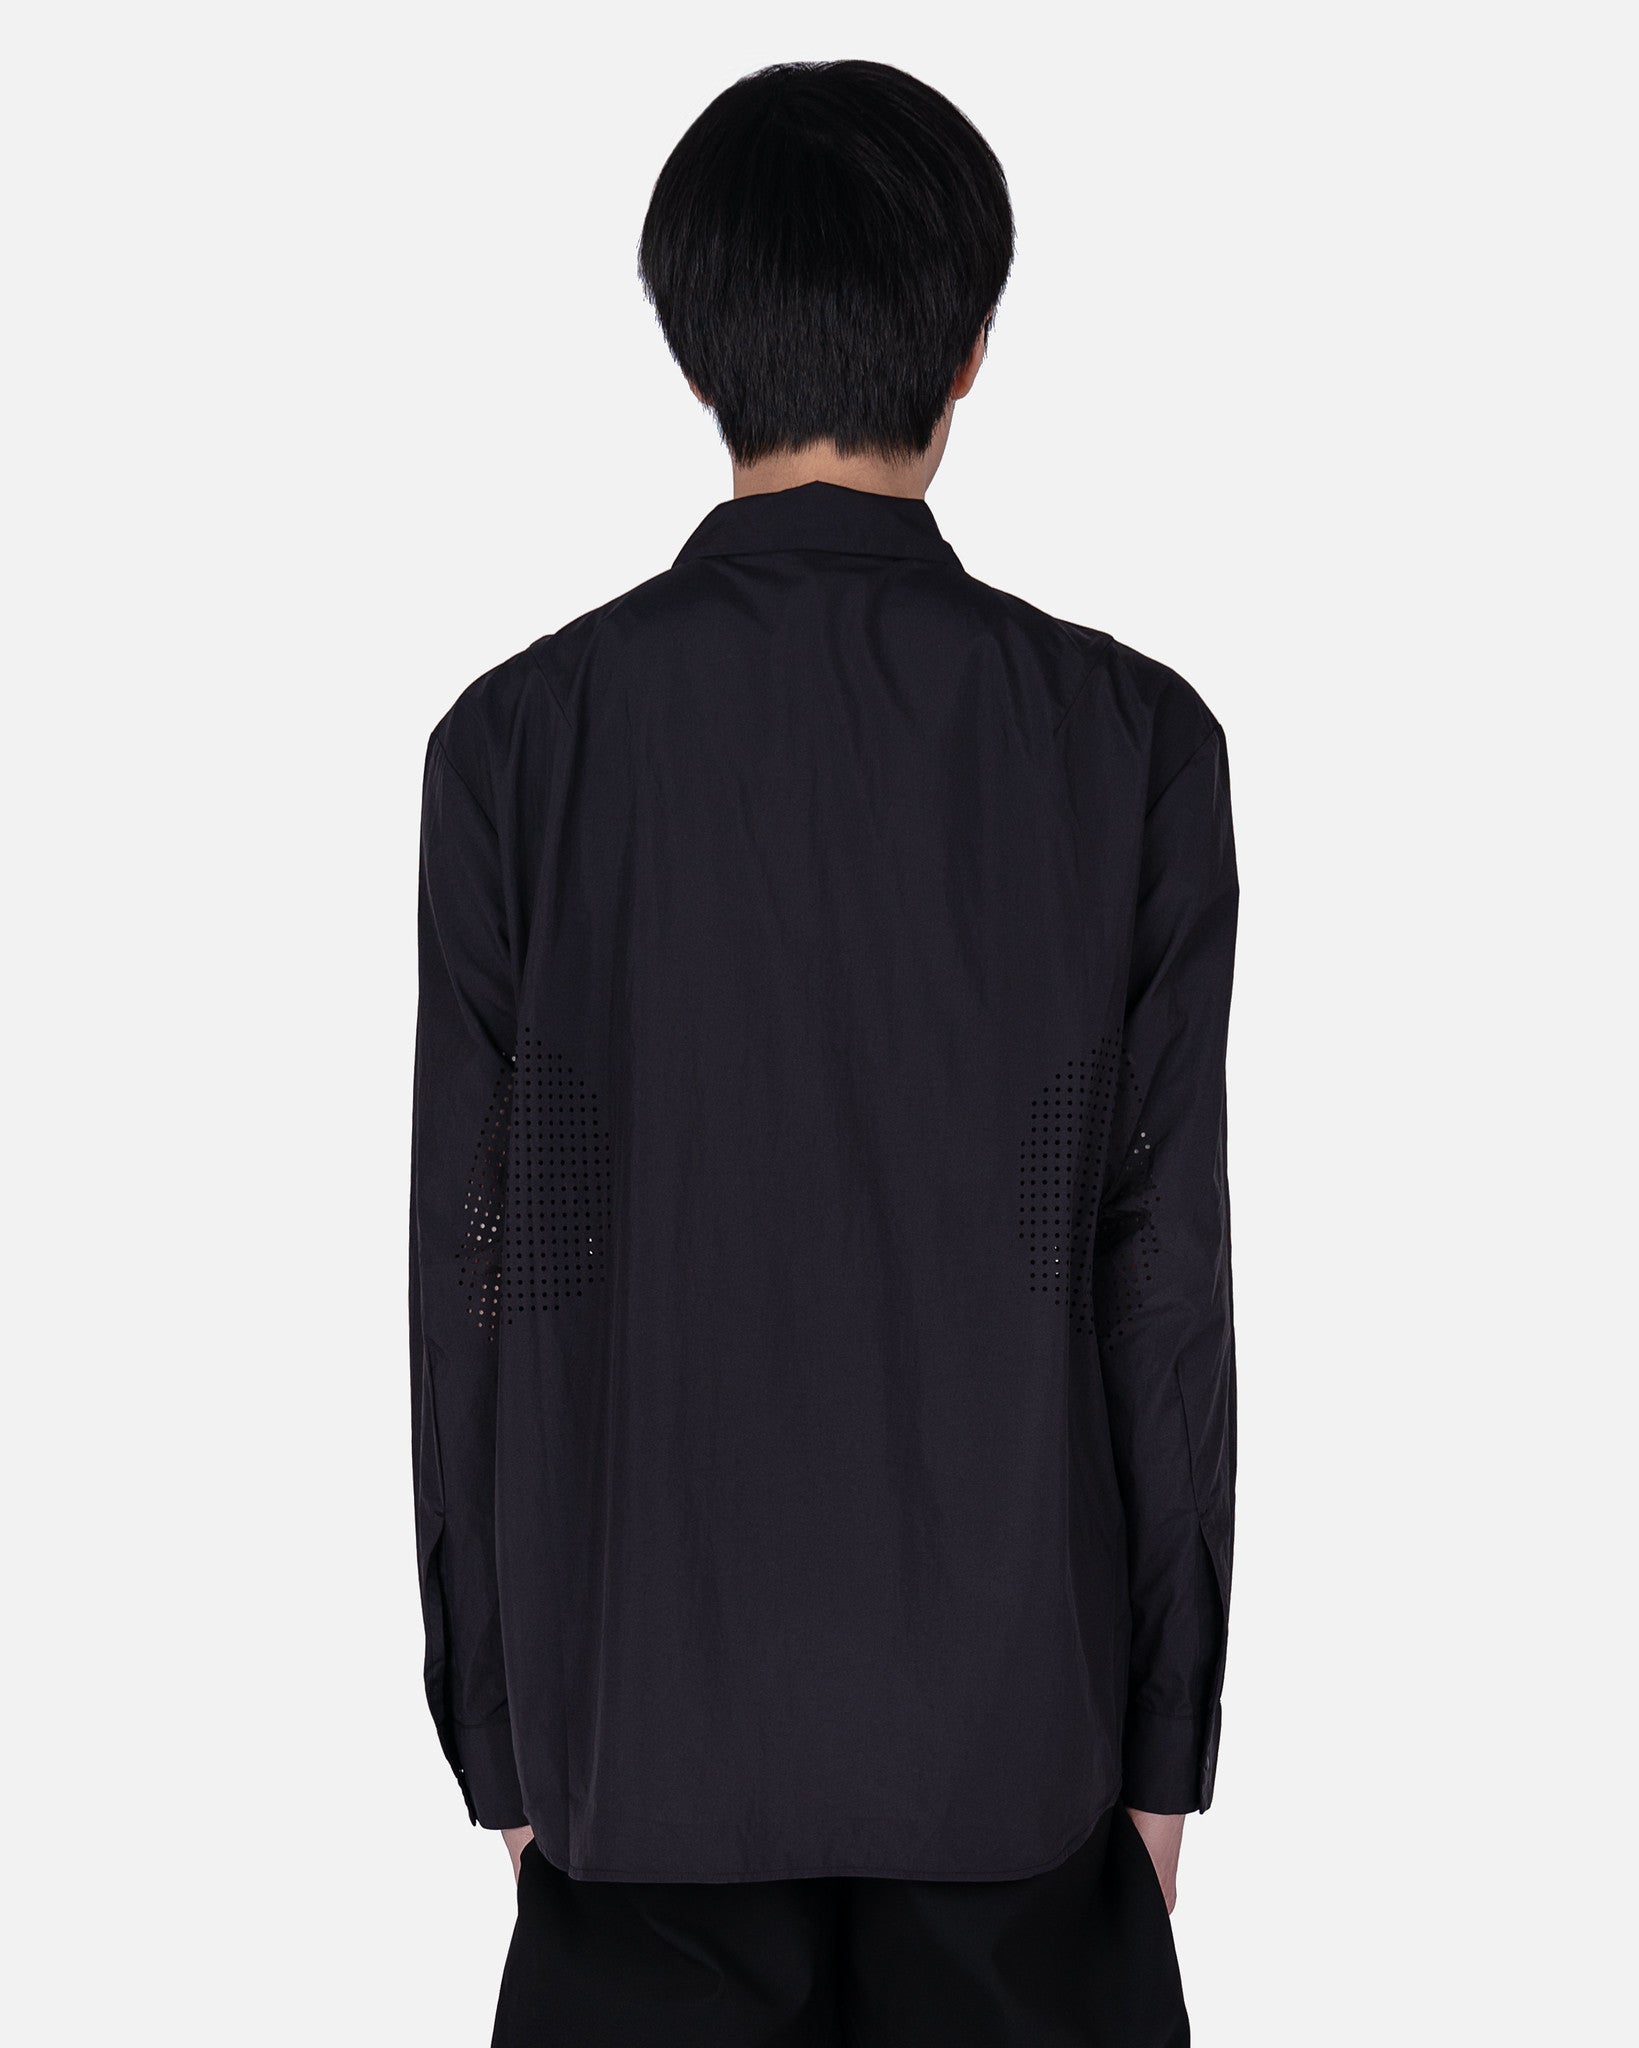 POST ARCHIVE FACTION (P.A.F) Men's Shirts 5.0 Shirt Right in Black